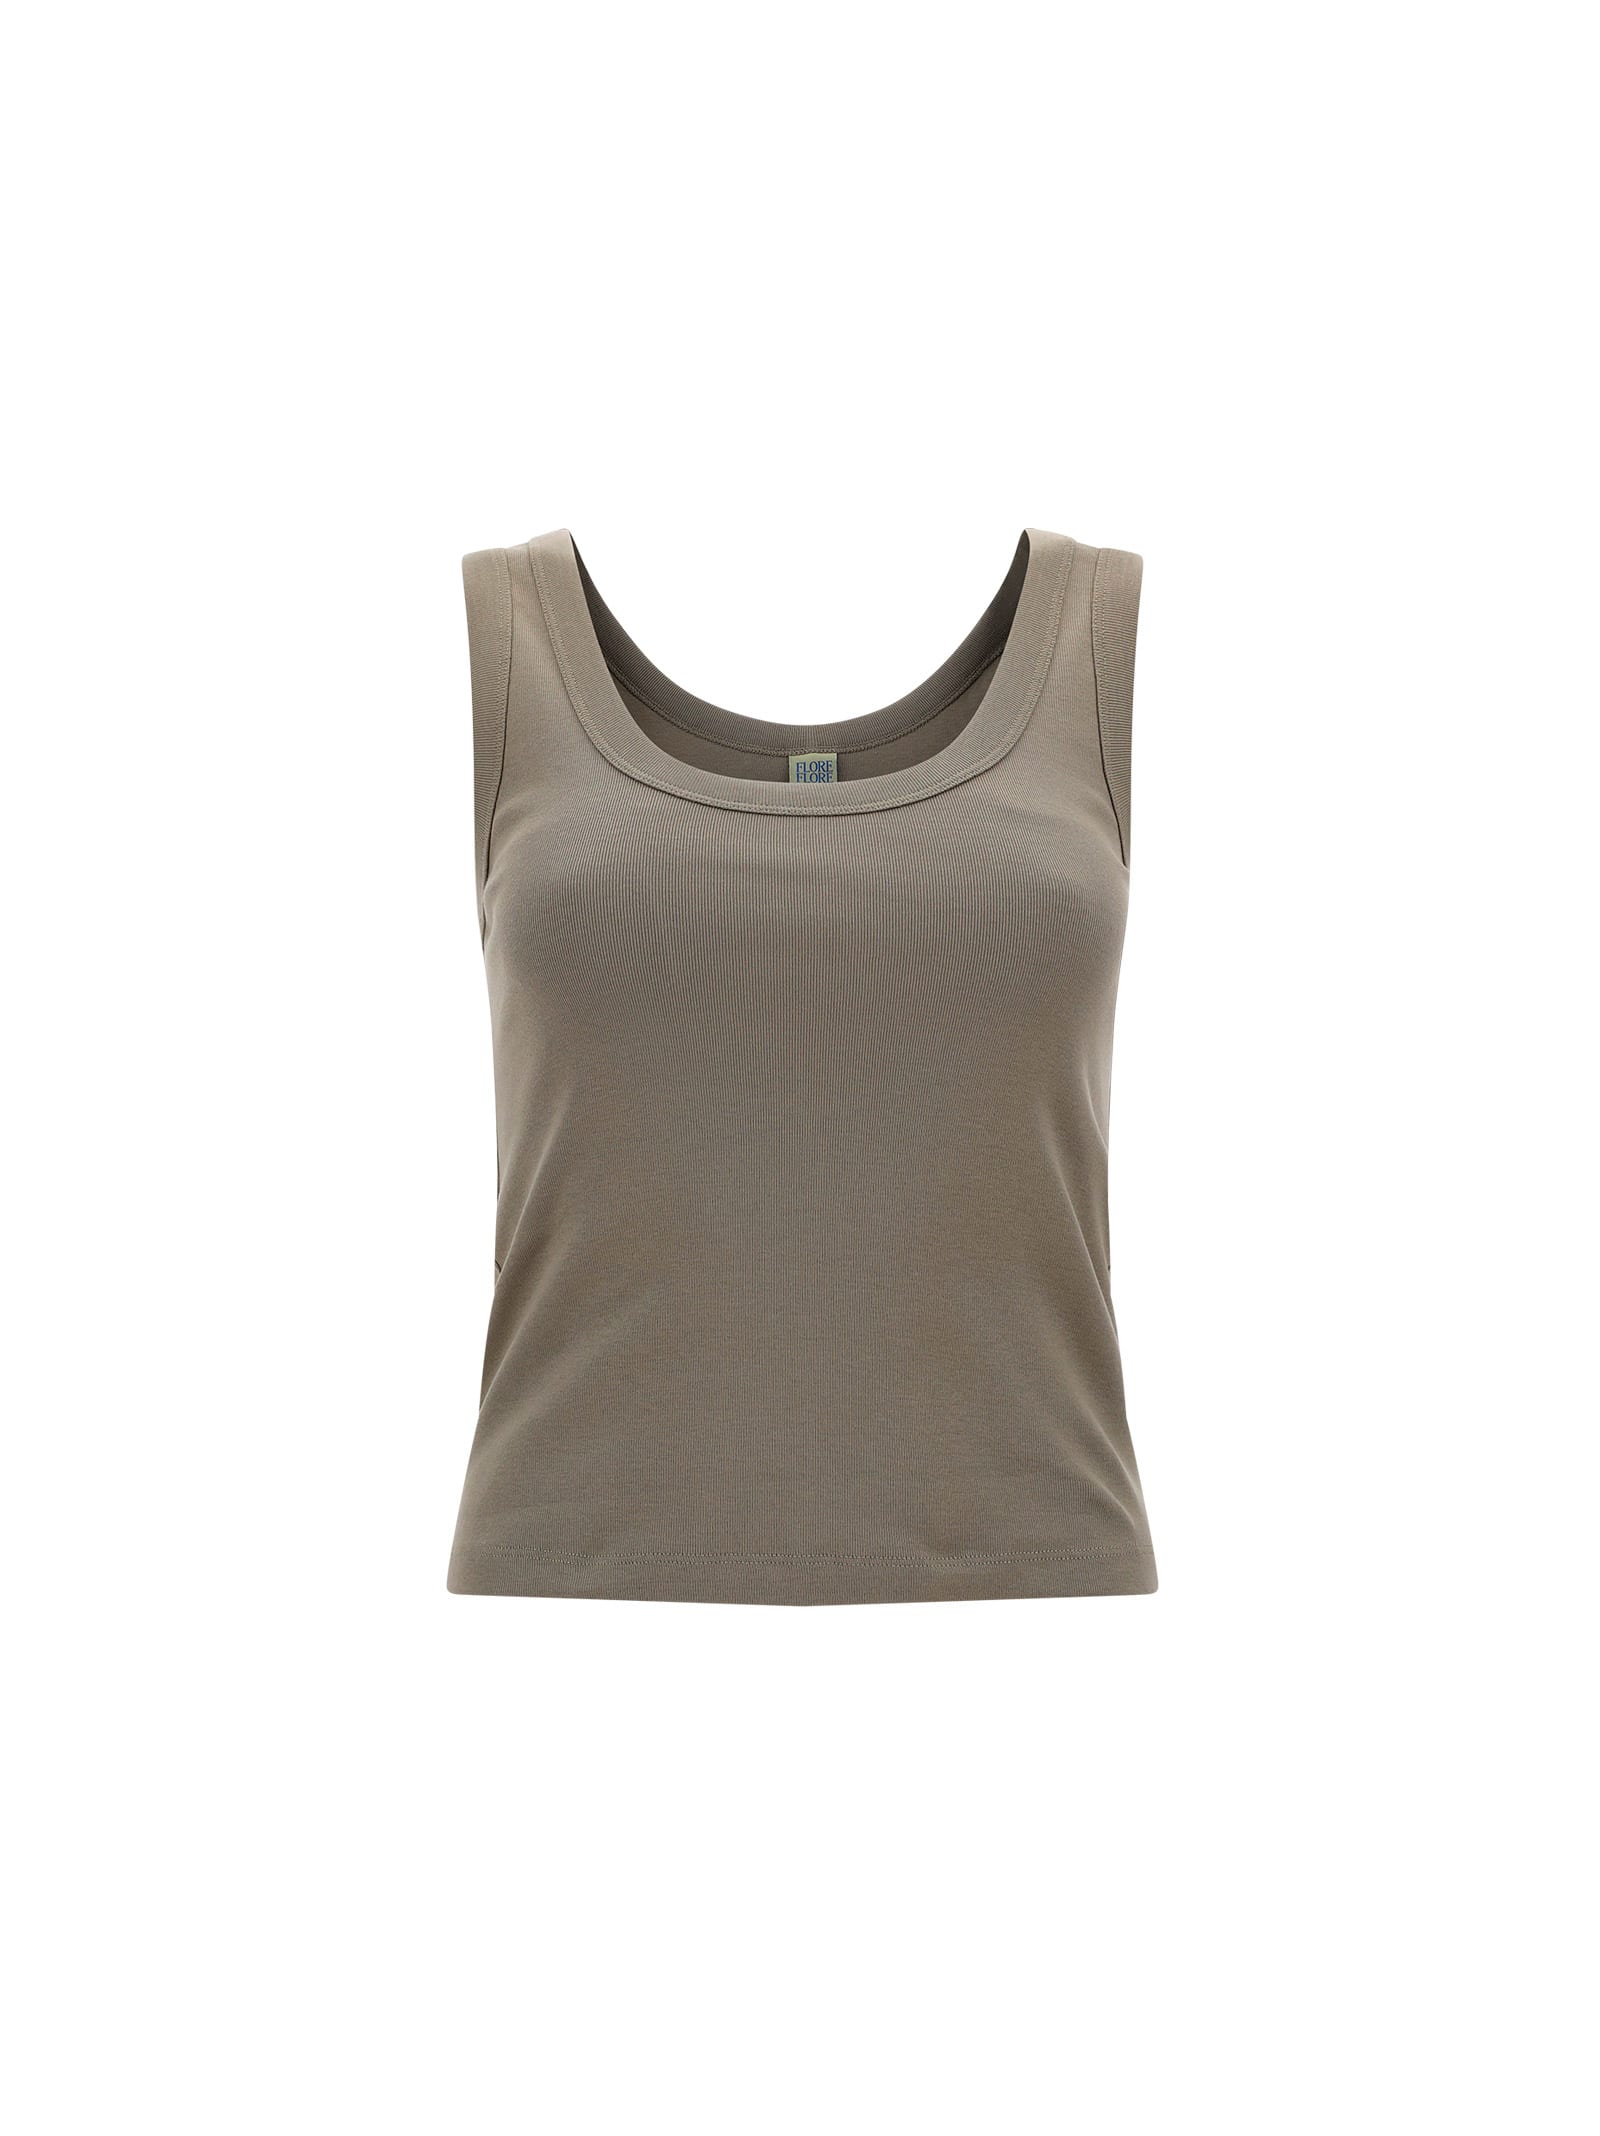 Flore Flore Hillie Tank Top In Taupe